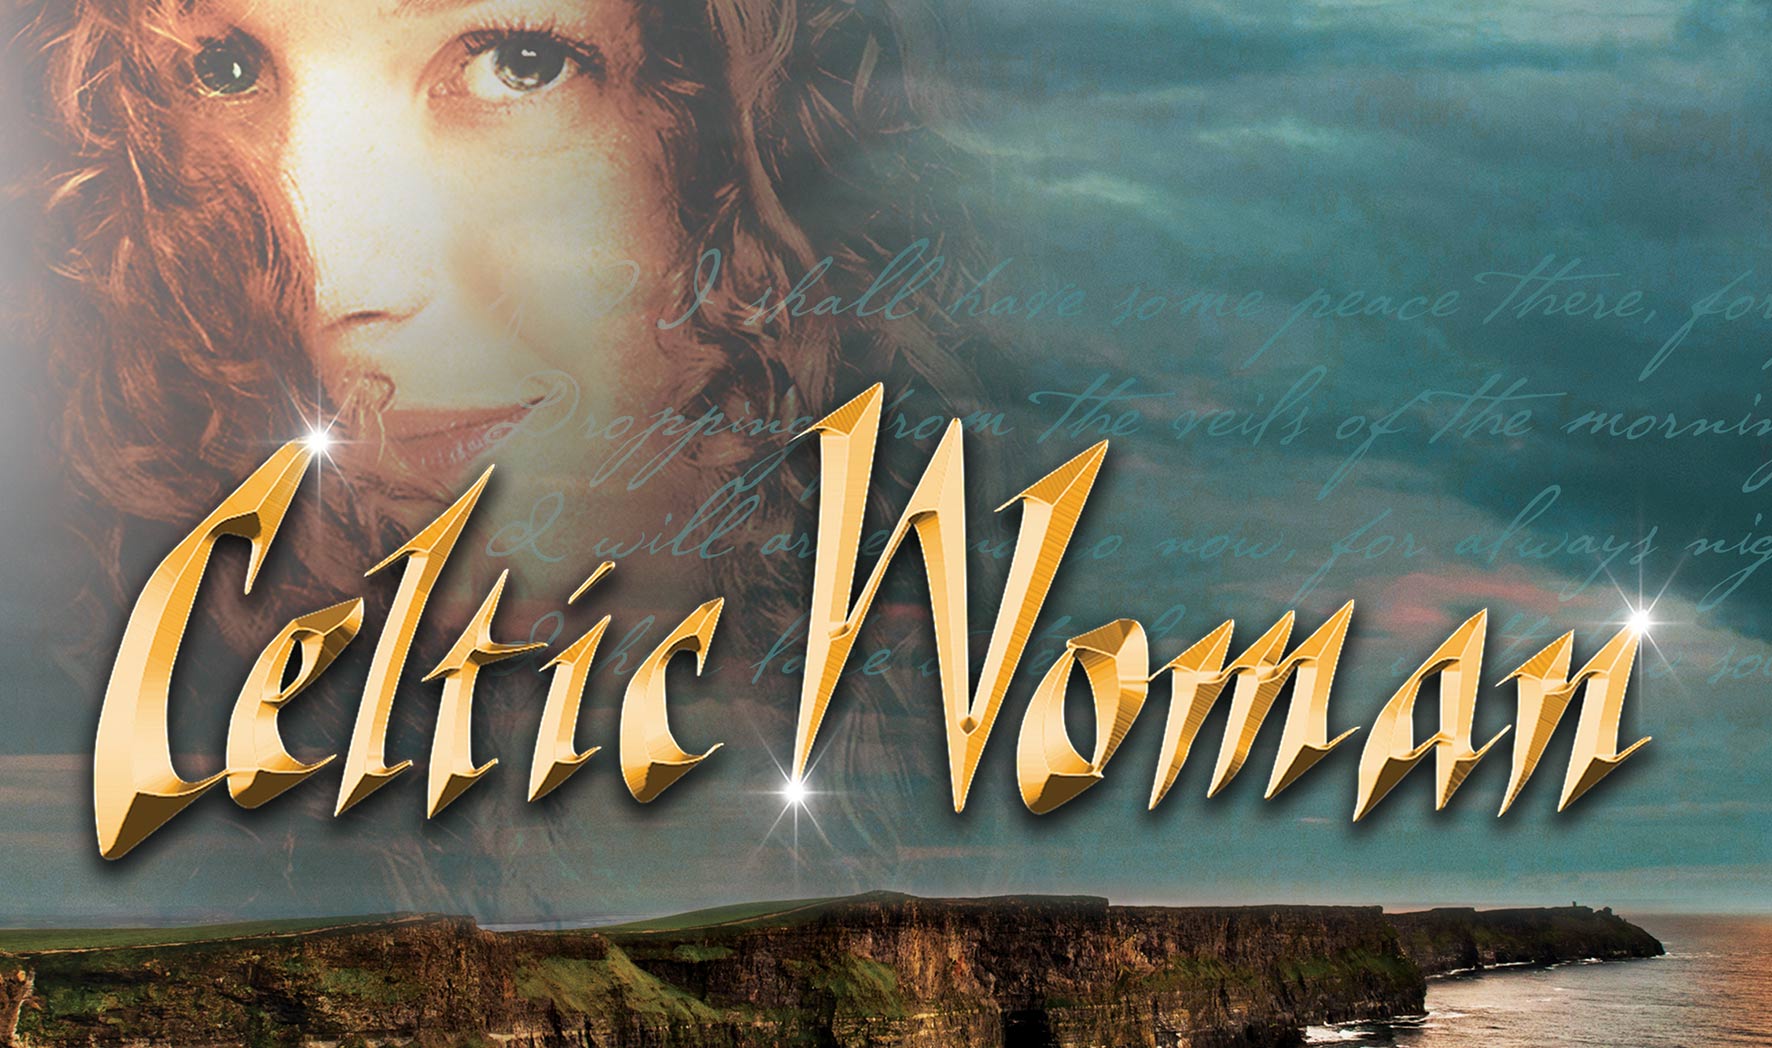 More Info for Celtic Woman: Postcards from Ireland